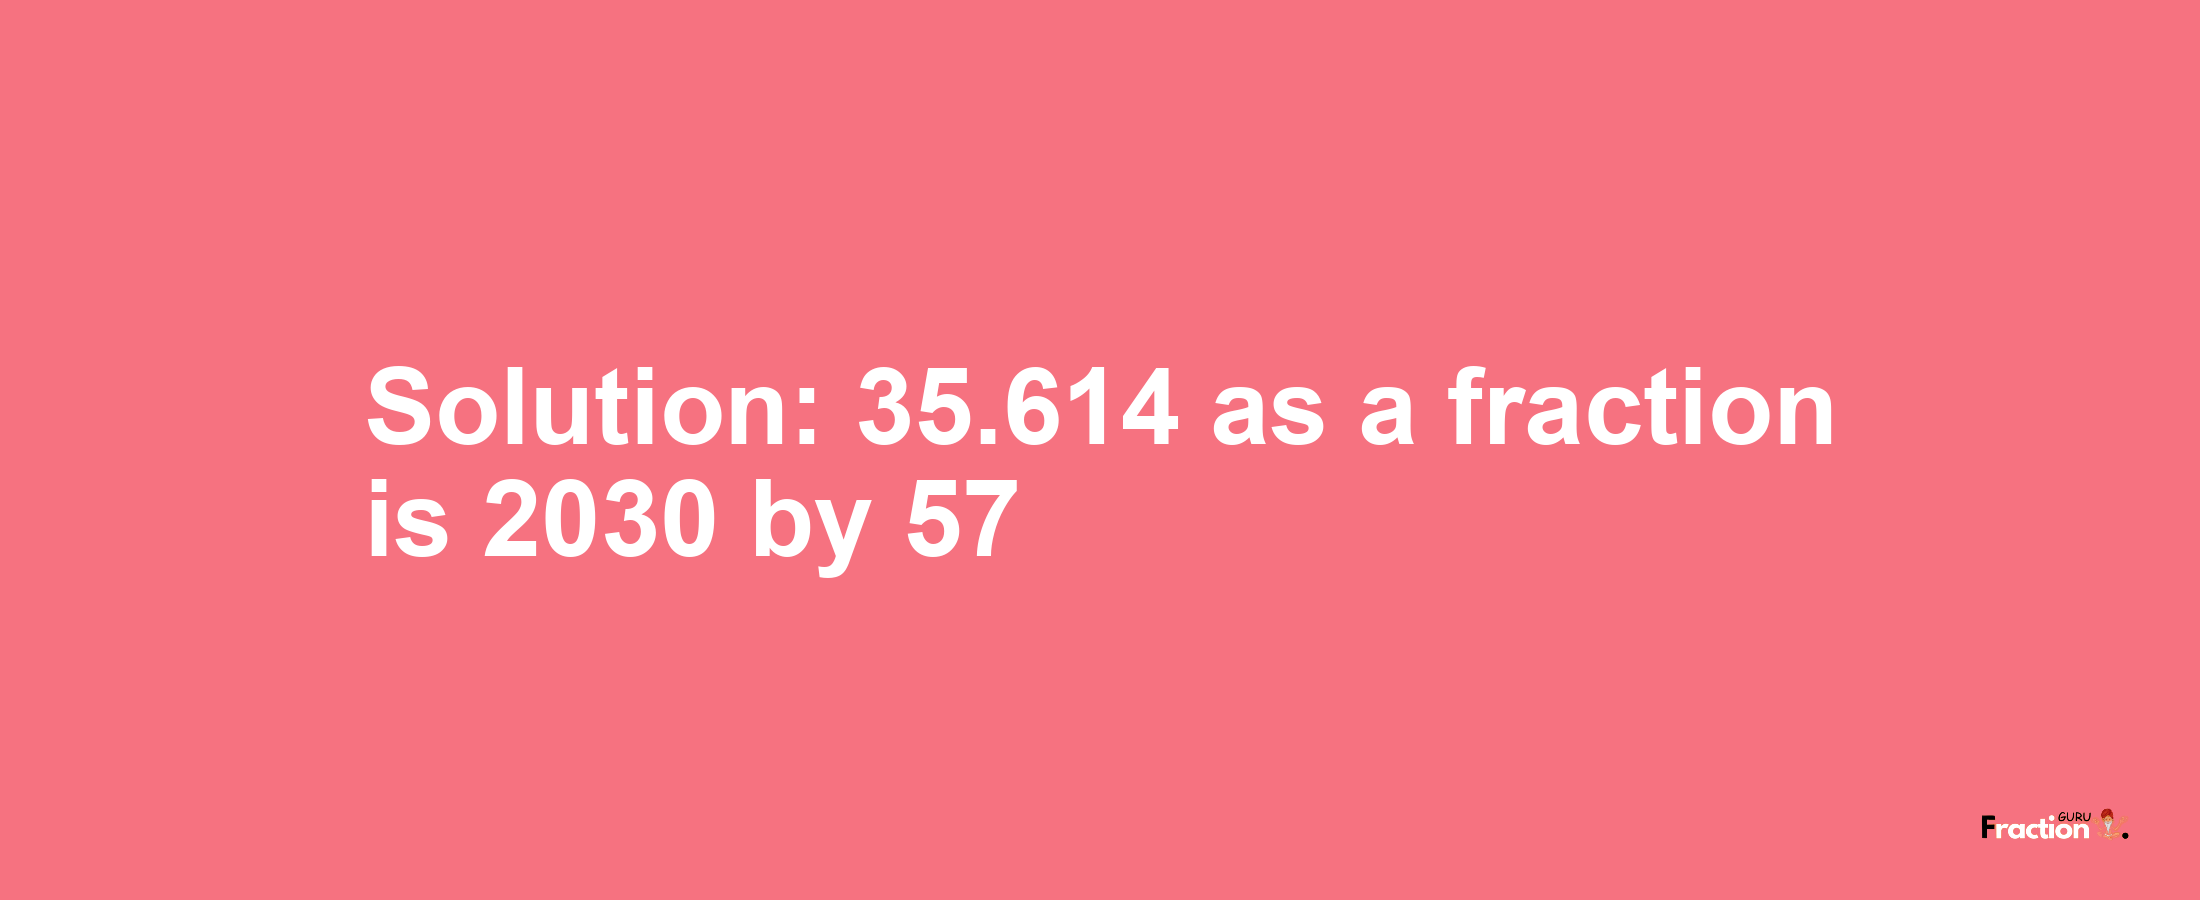 Solution:35.614 as a fraction is 2030/57